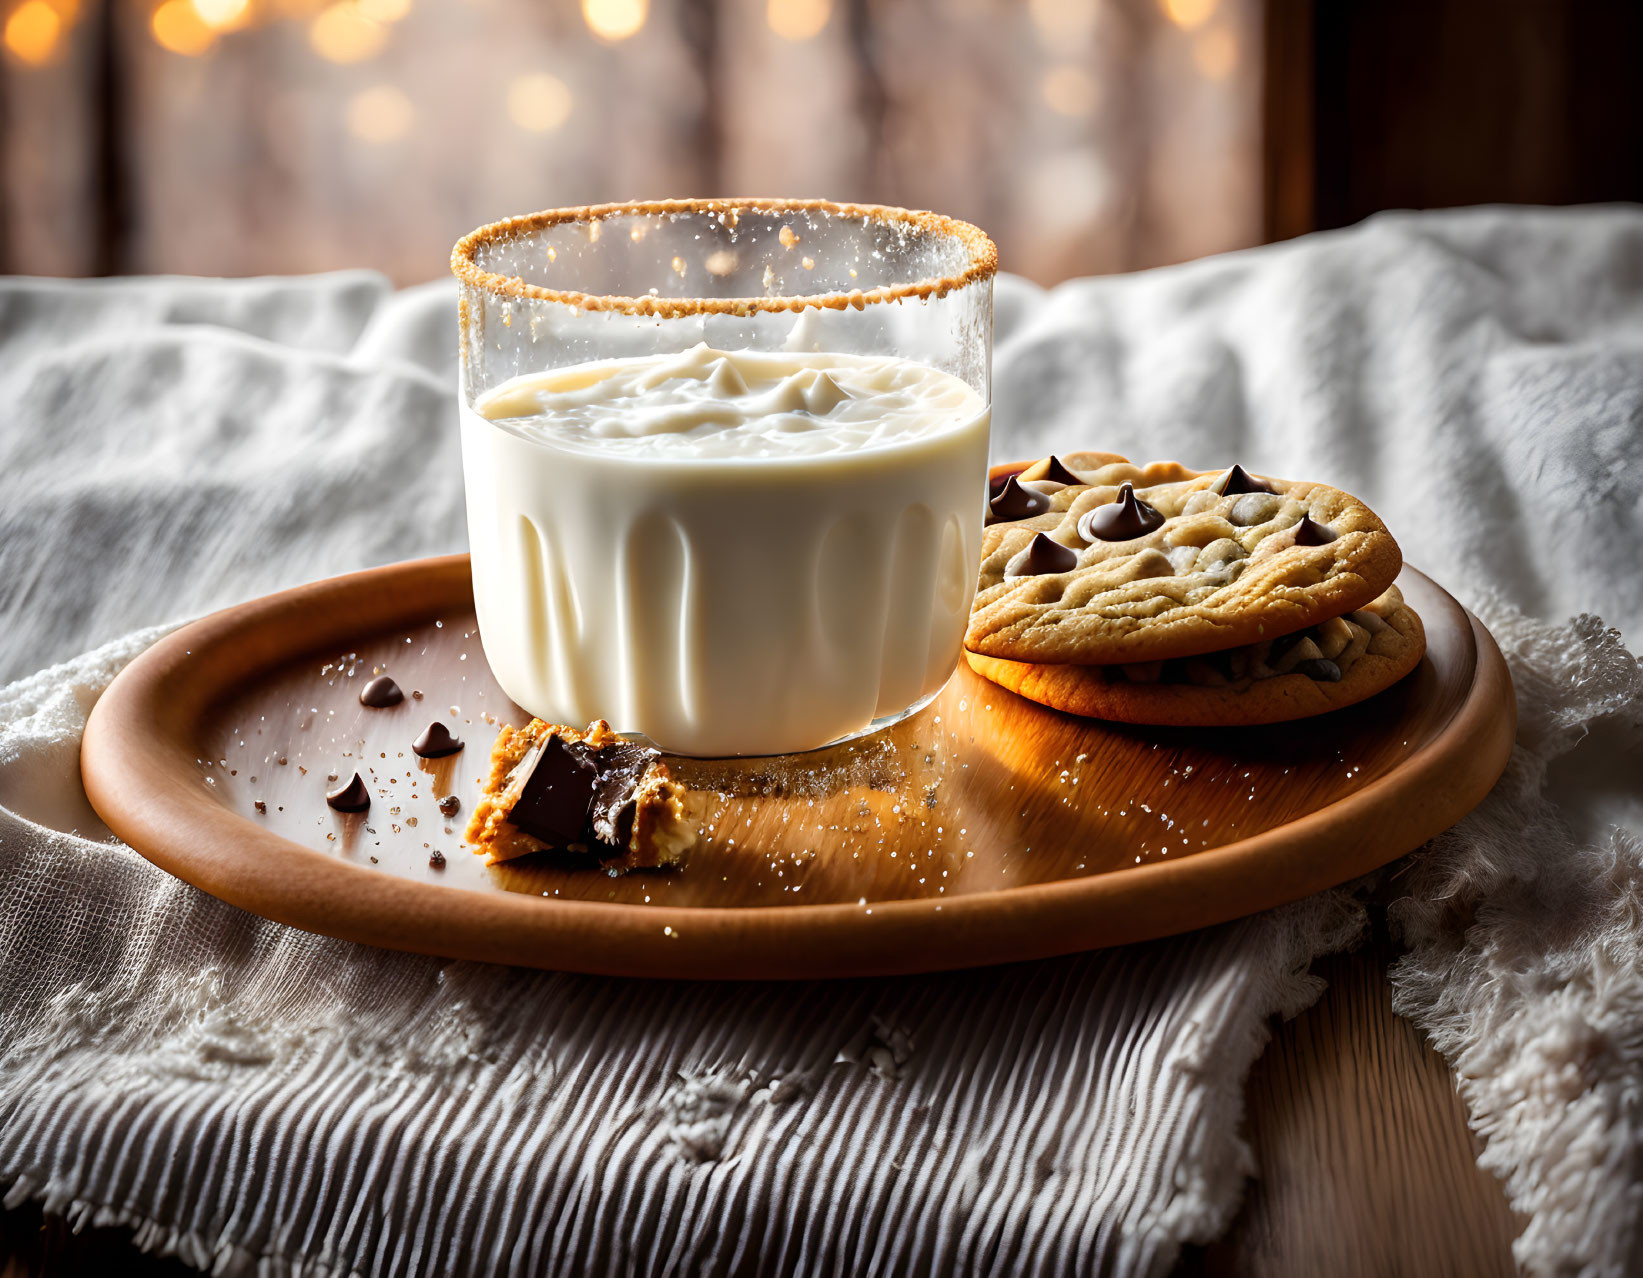 Frothy milk glass and cookies on wooden tray with warm lights